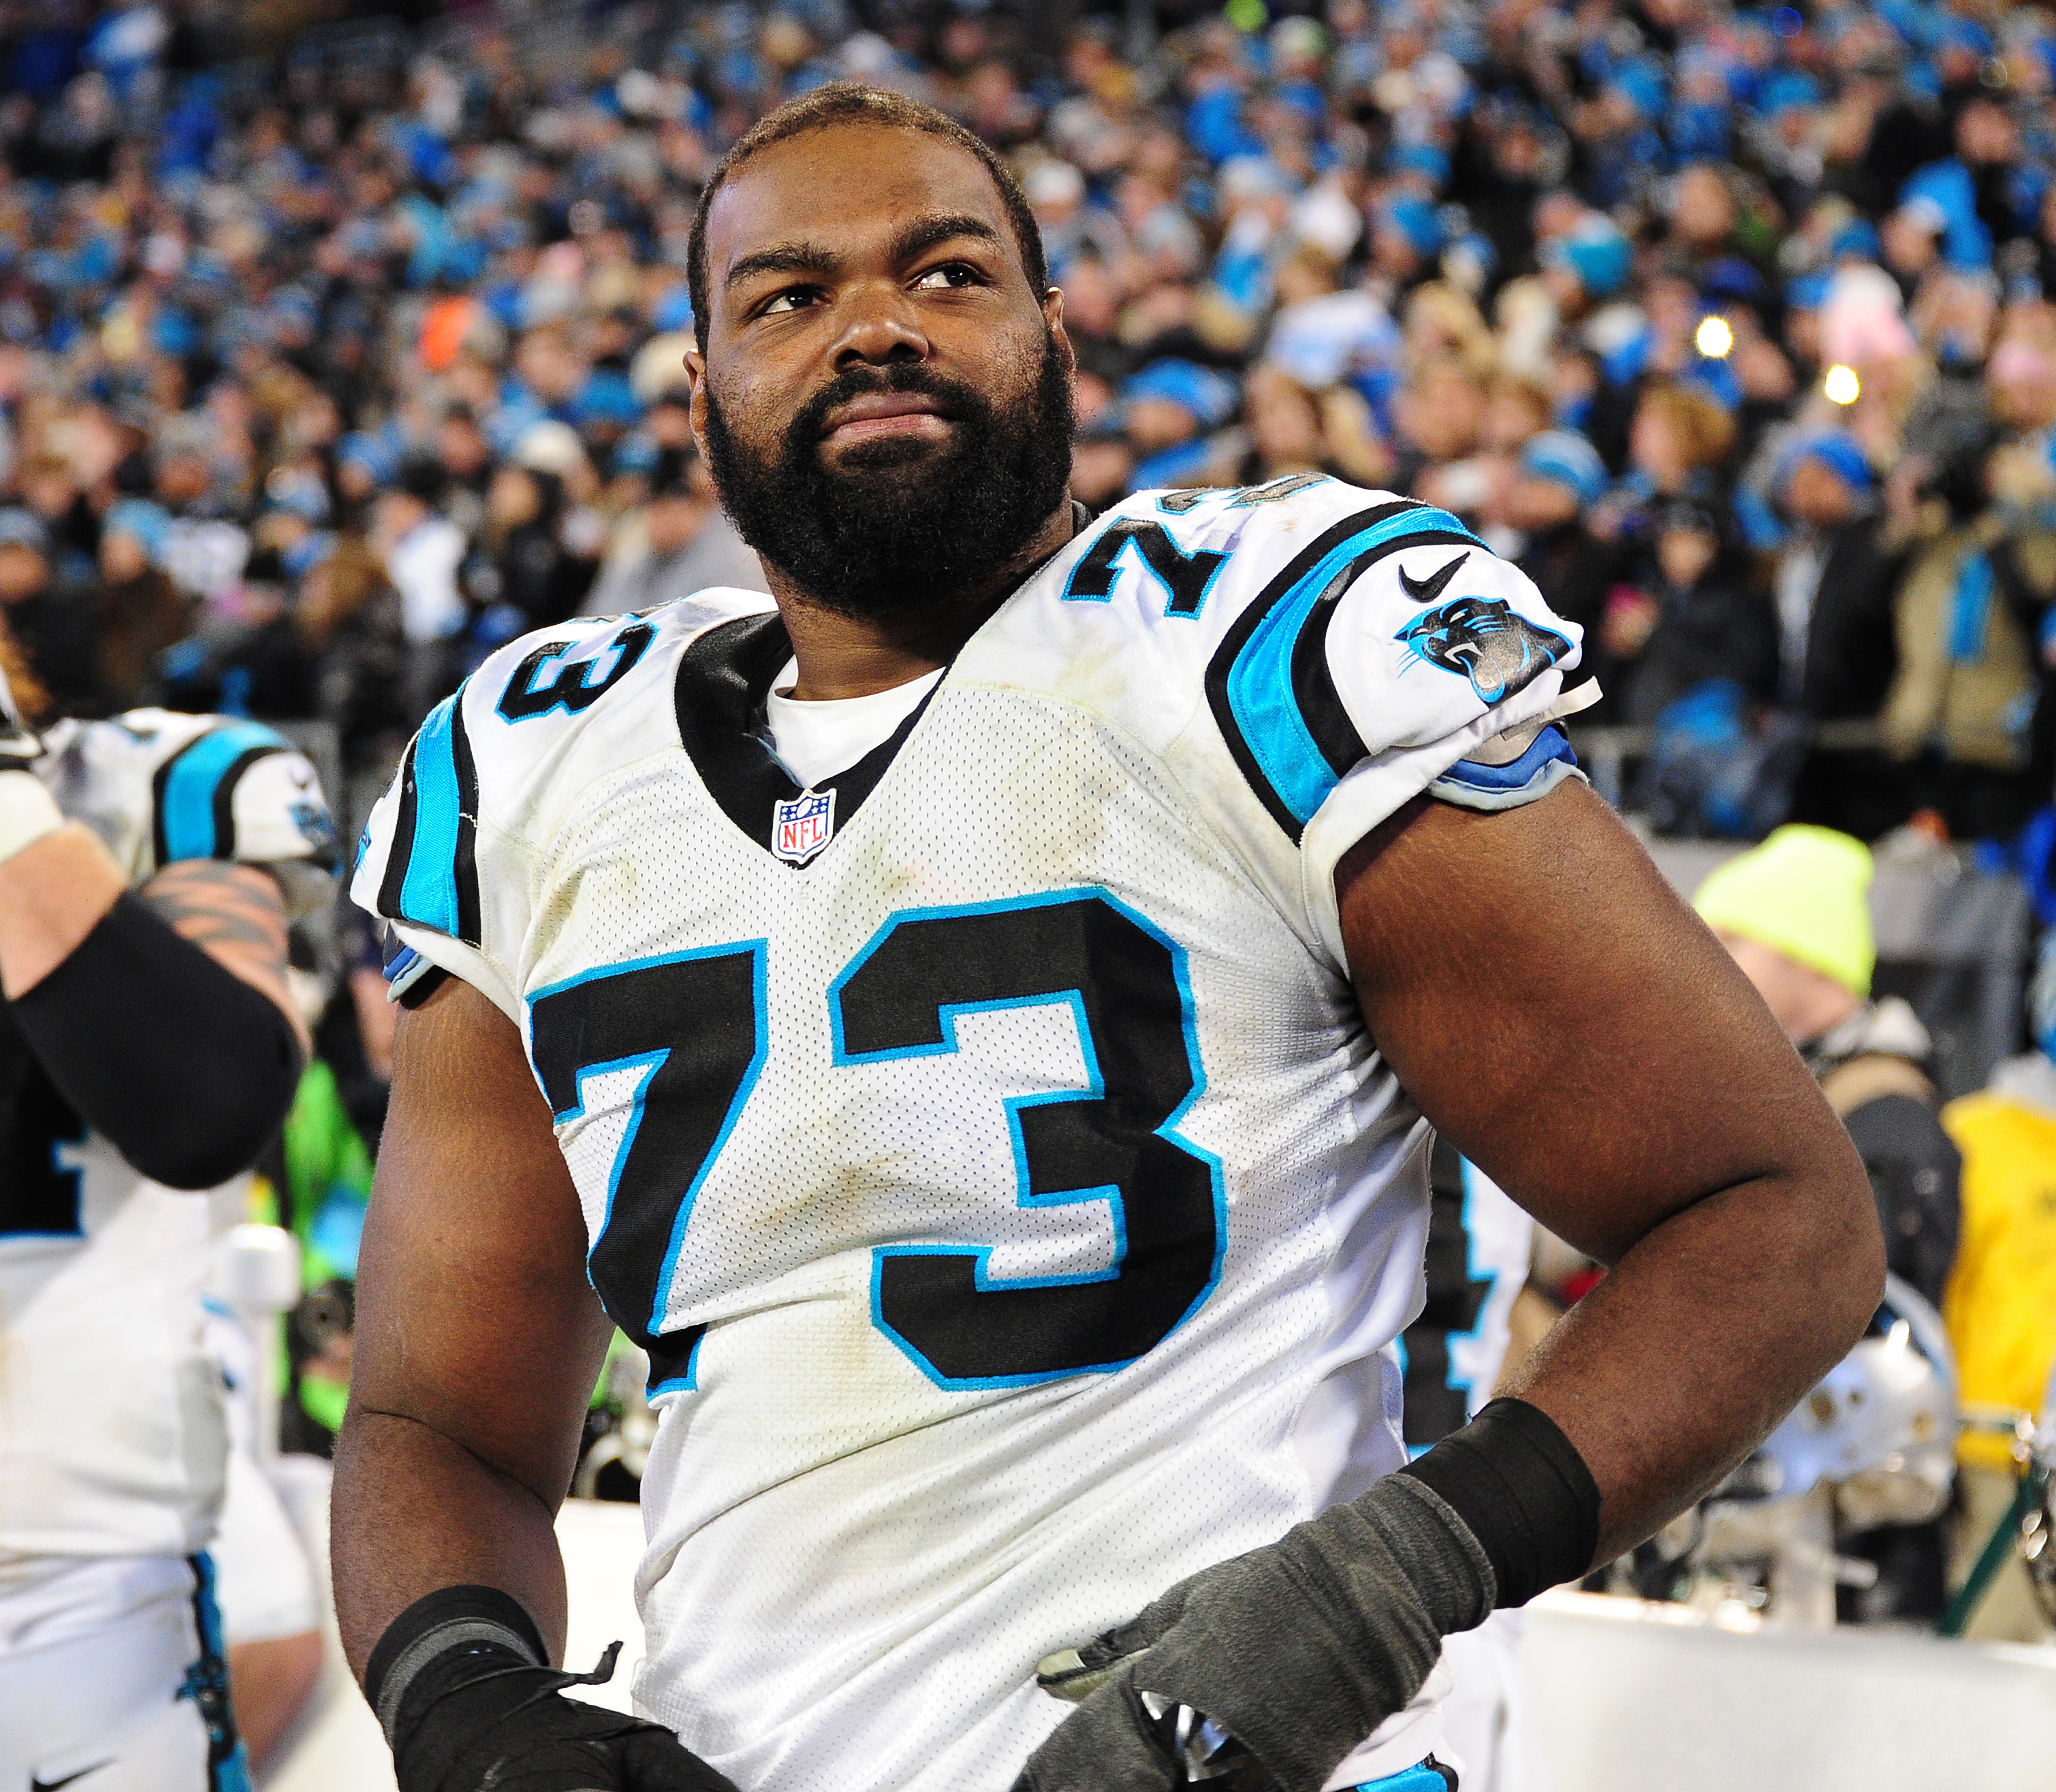 Closeup of Michael Oher on the football field sideline